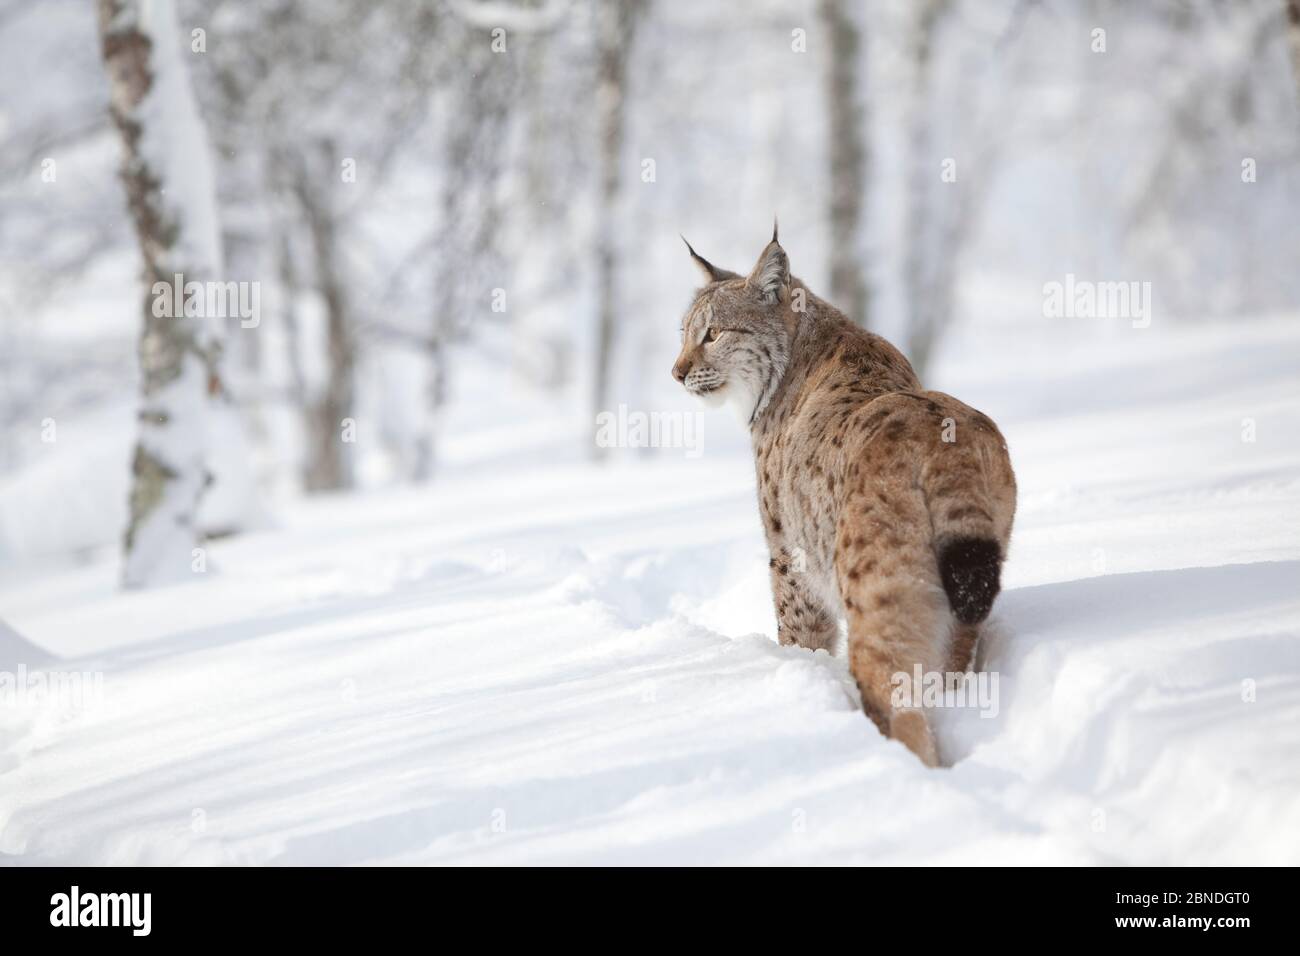 Eurasian lynx (Lynx lynx) rear view showing short tail, walking through snow in winter birch forest, captive. Norway. March. Stock Photo